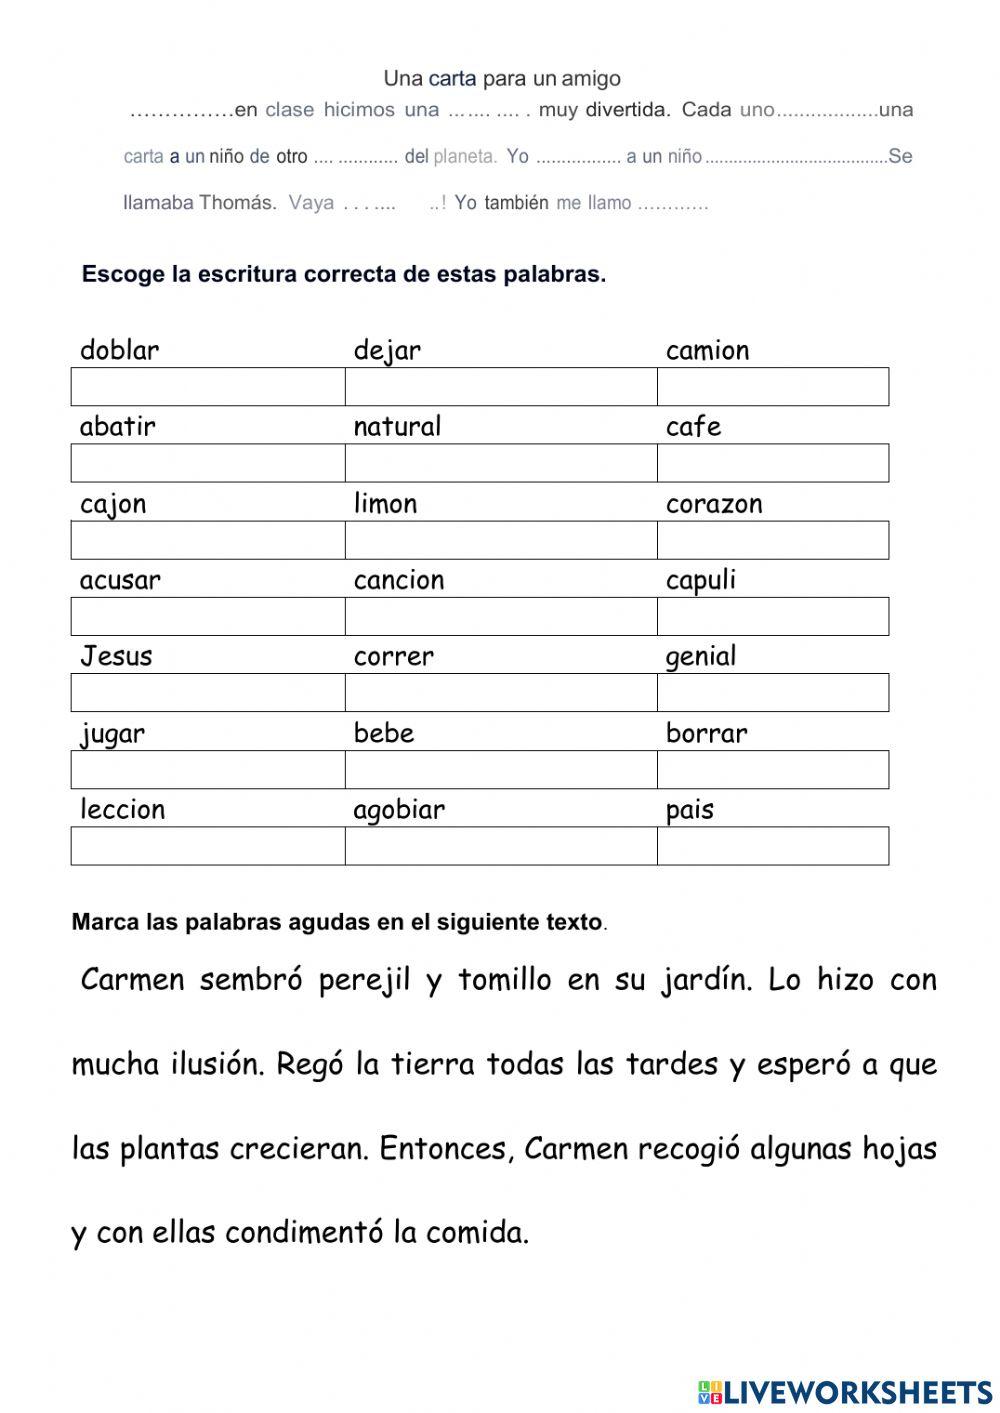 palabras agudas online exercise for QUINTO | Live Worksheets